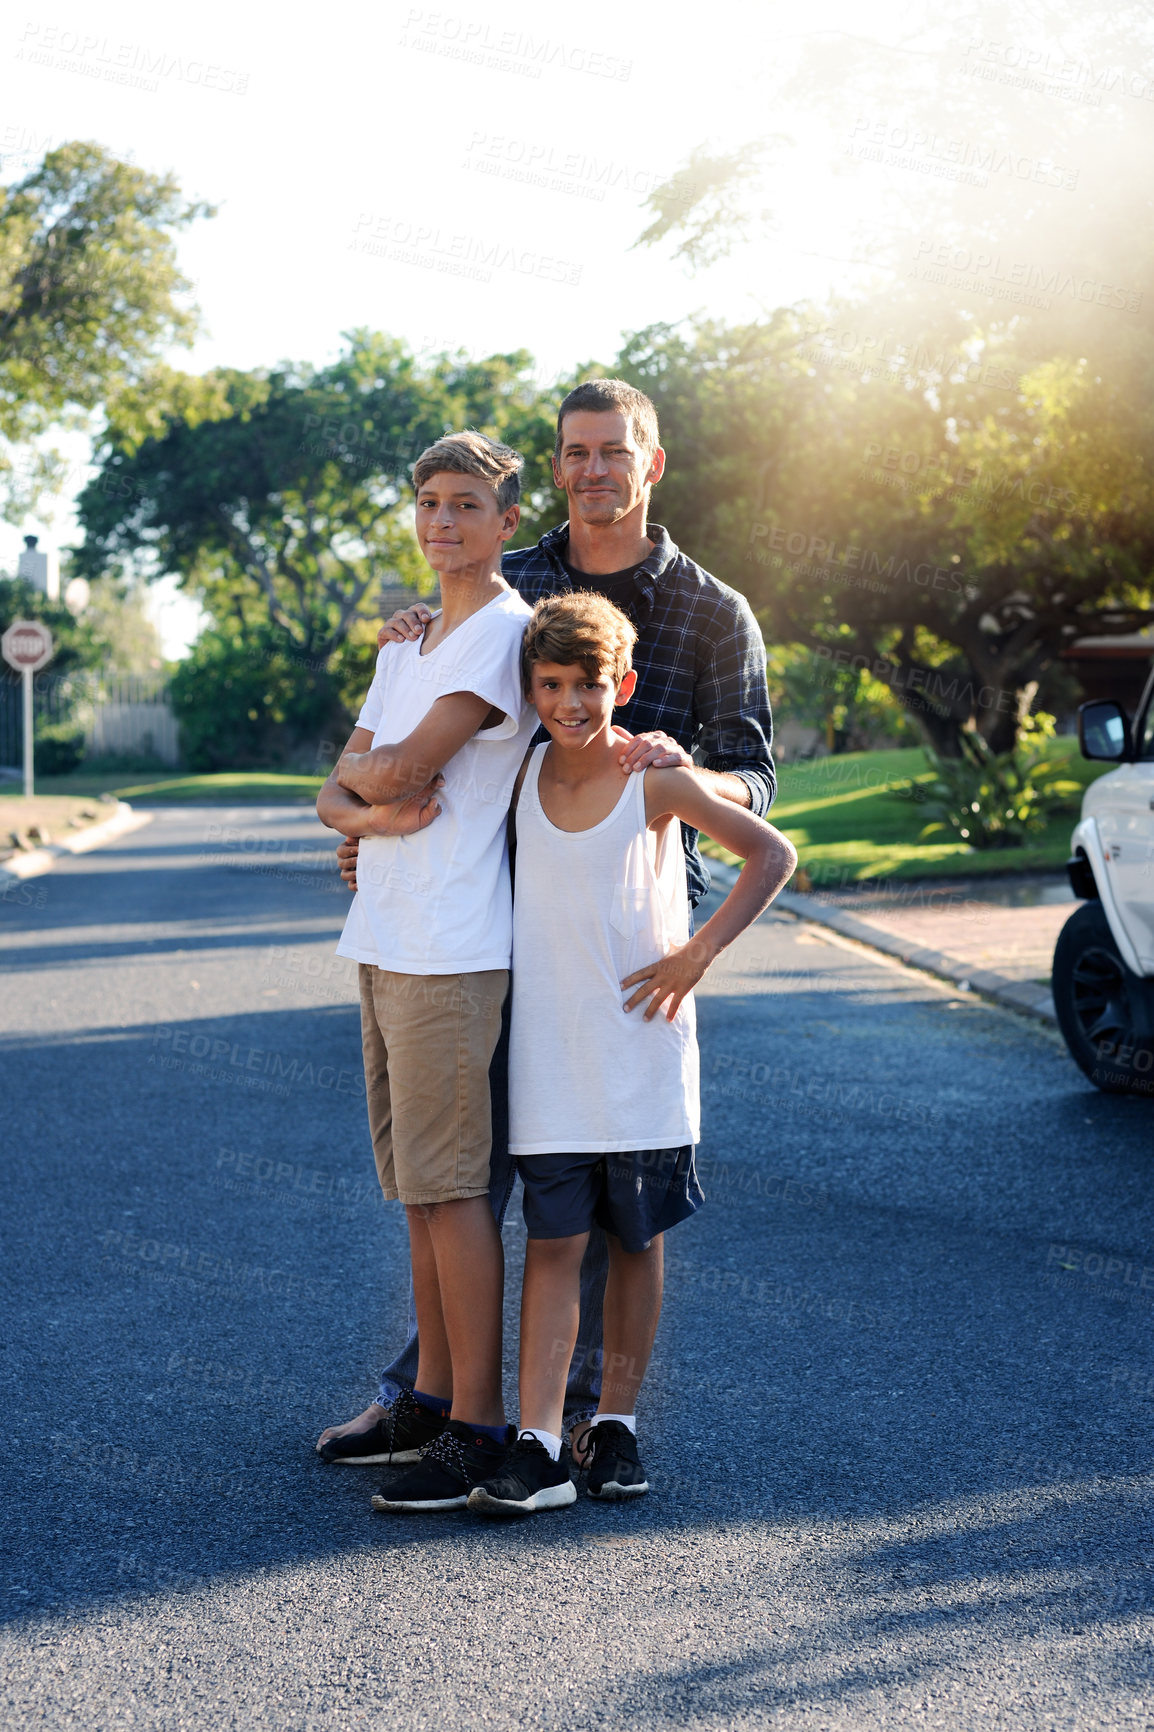 Buy stock photo Portrait of a father standing with his two young sons outside